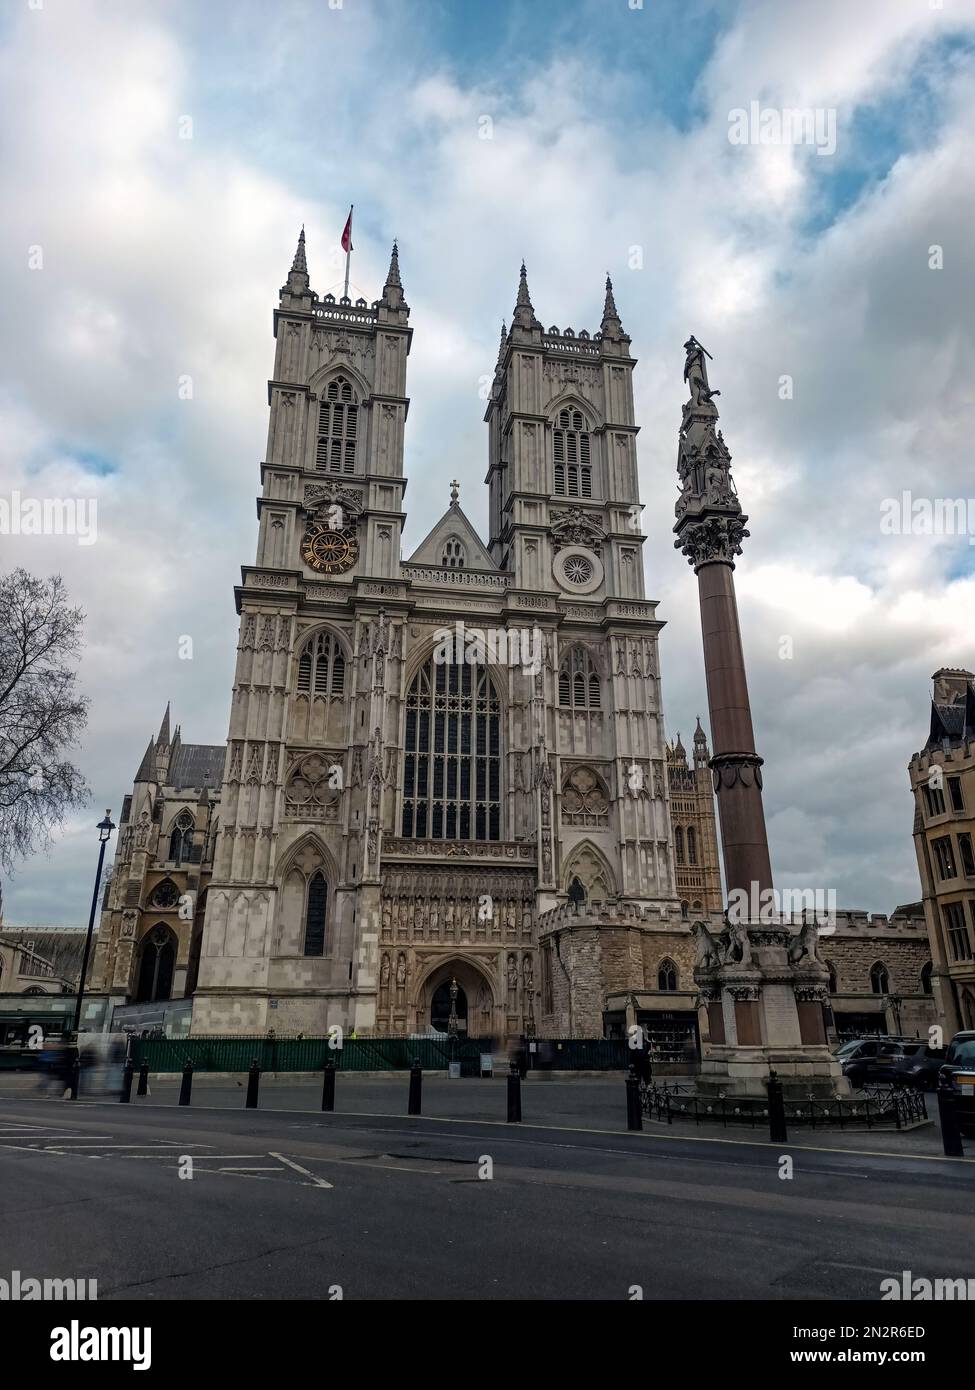 The magnificent Westminster Abbey in London, UK Stock Photo